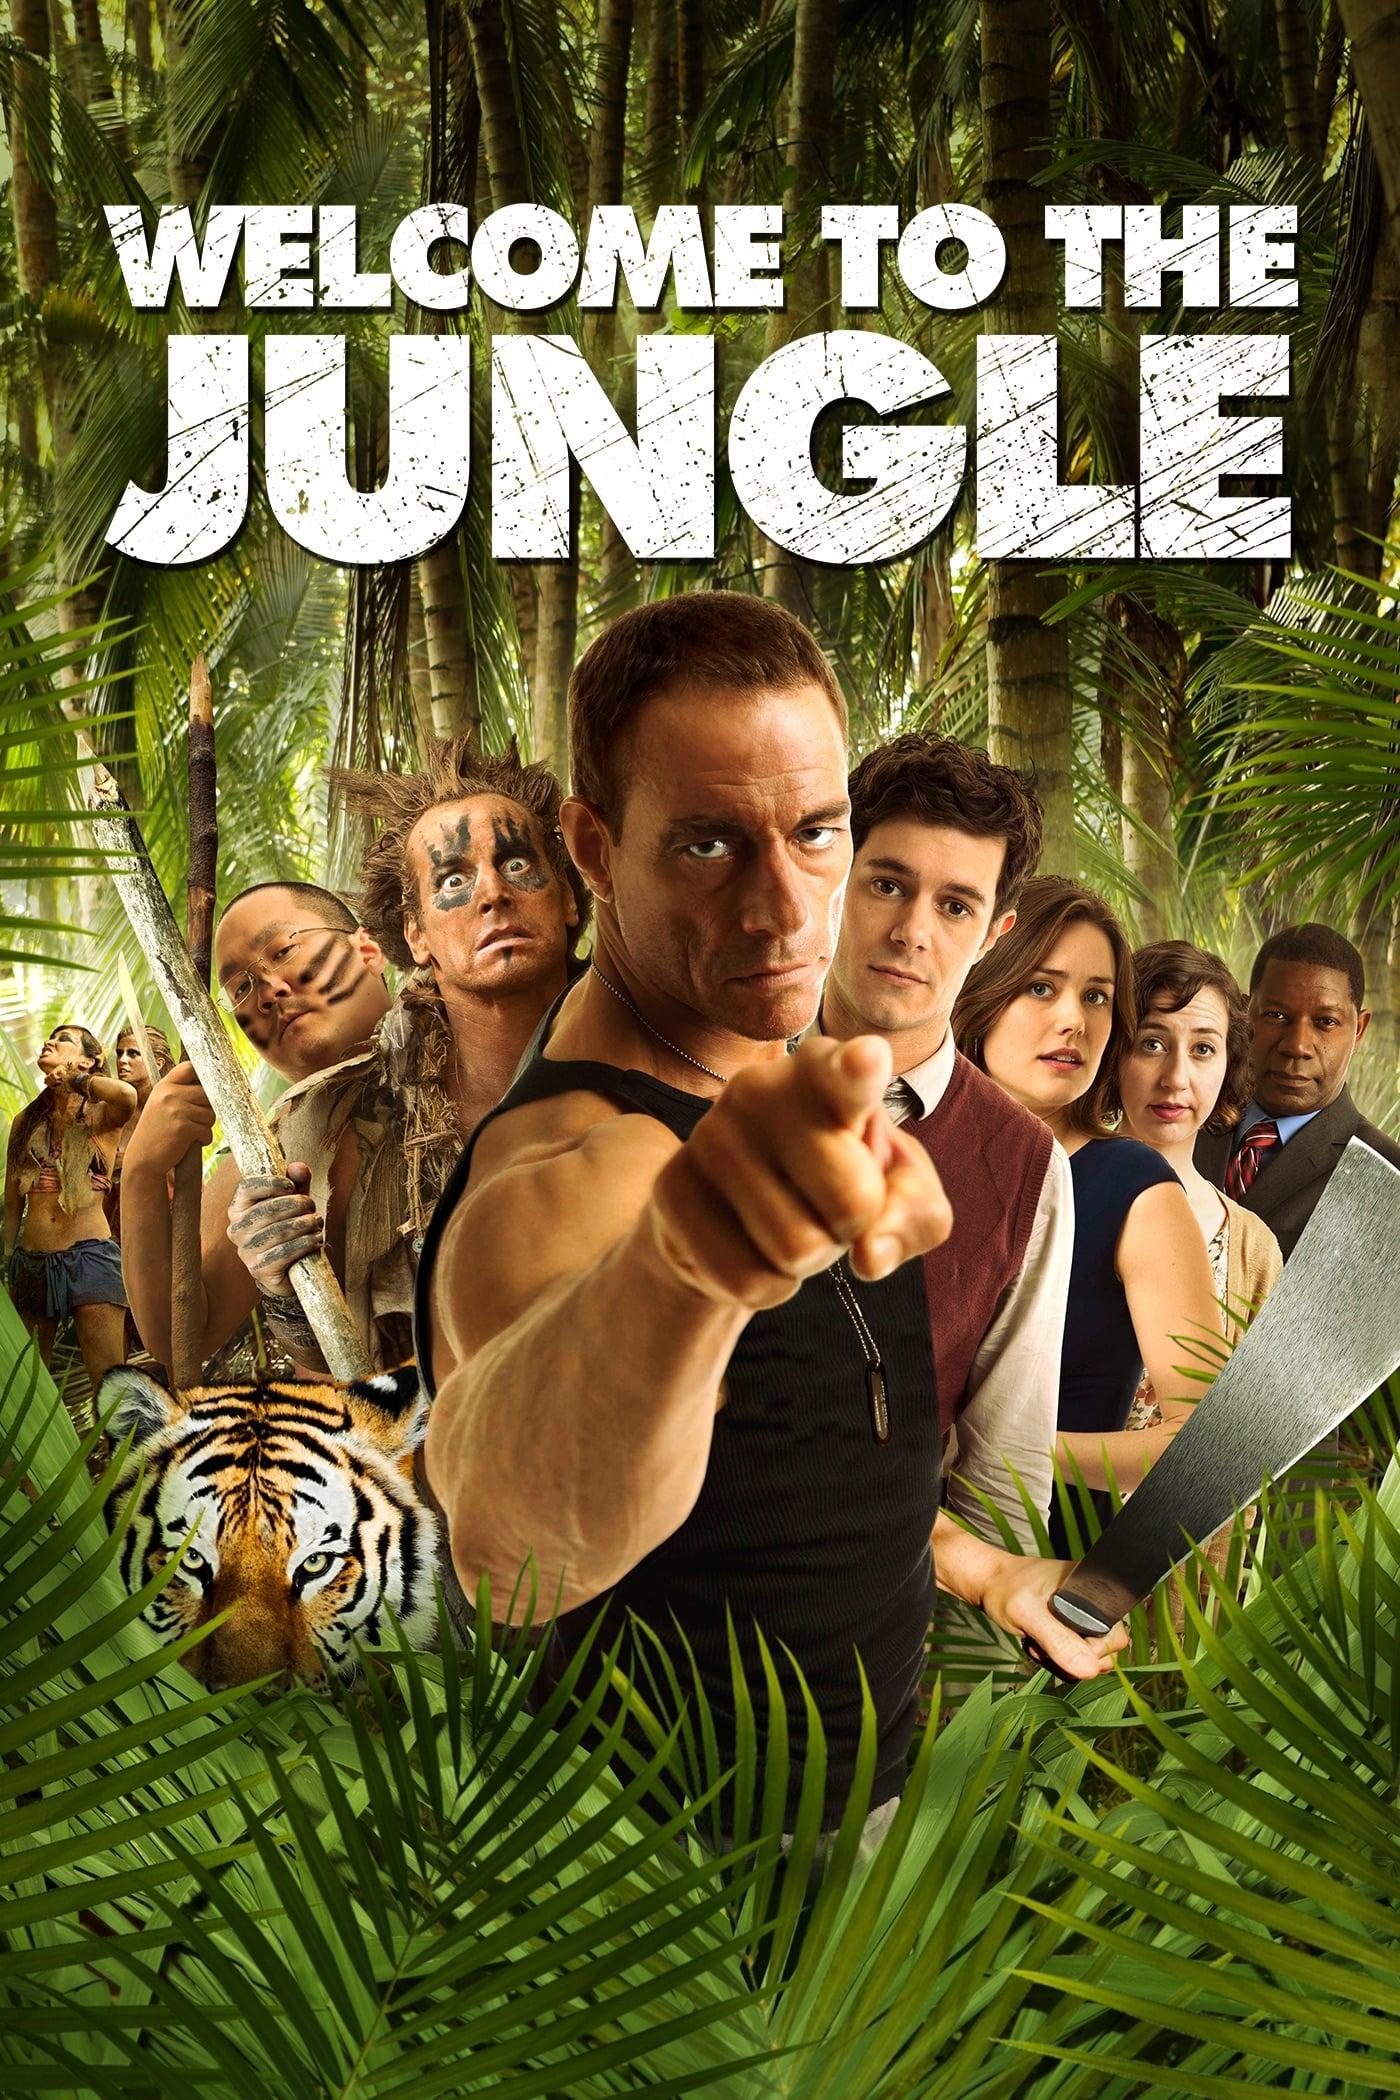 Dschungelcamp - Welcome to the Jungle poster